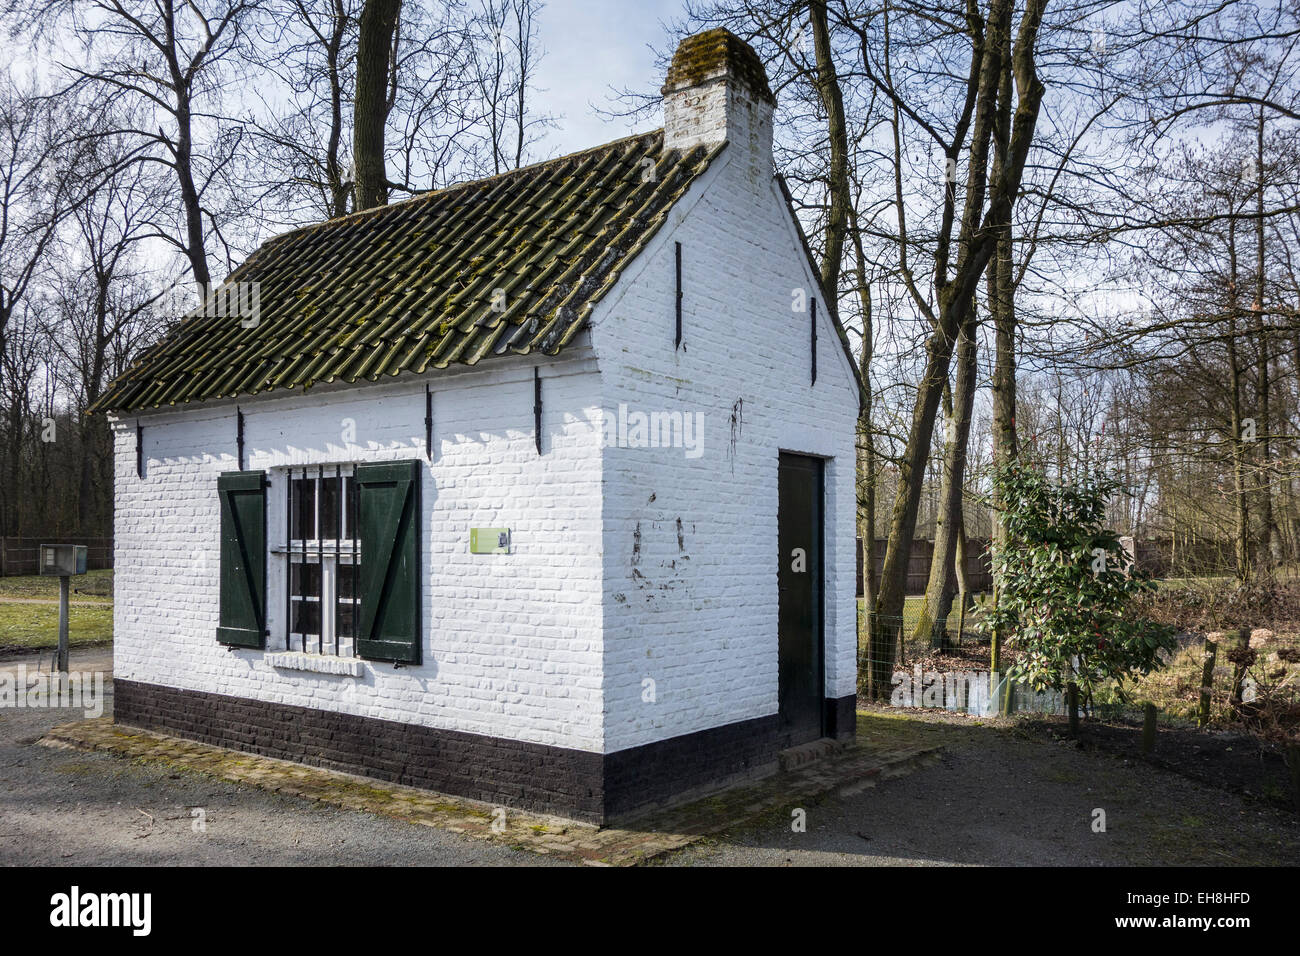 Decoyman's cottage at the duck decoy used for catching wild ducks at Overmere Donk, Berlare, Belgium Stock Photo